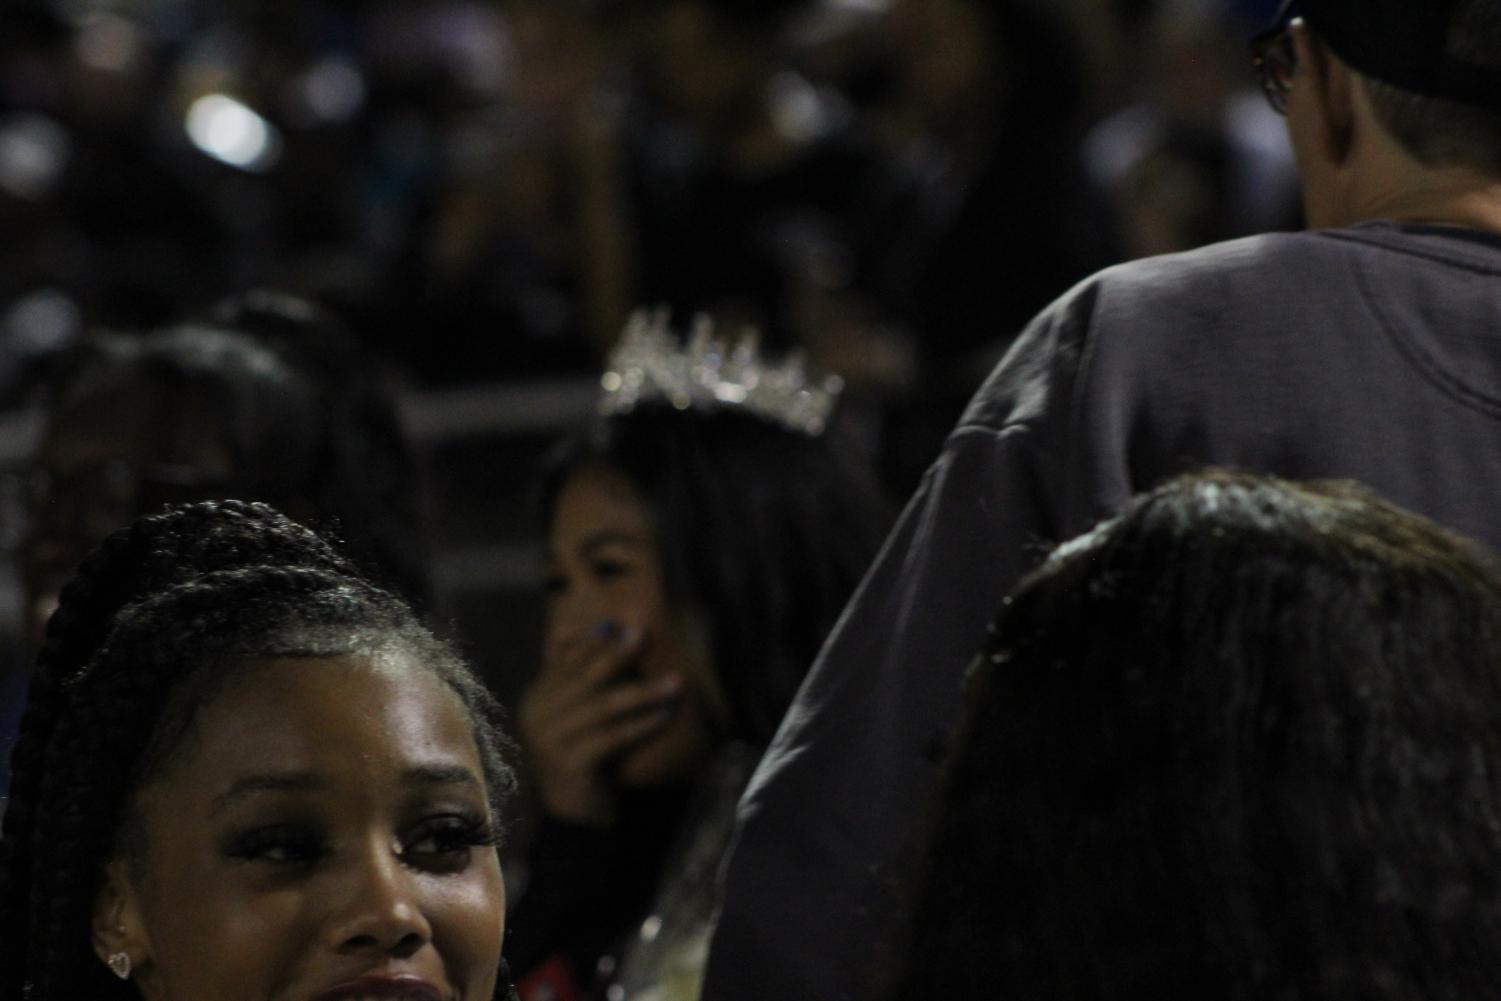 Shainah+Walker+crowned+new+Homecoming+Queen+%7C+HOCO22+Court+Slideshow.